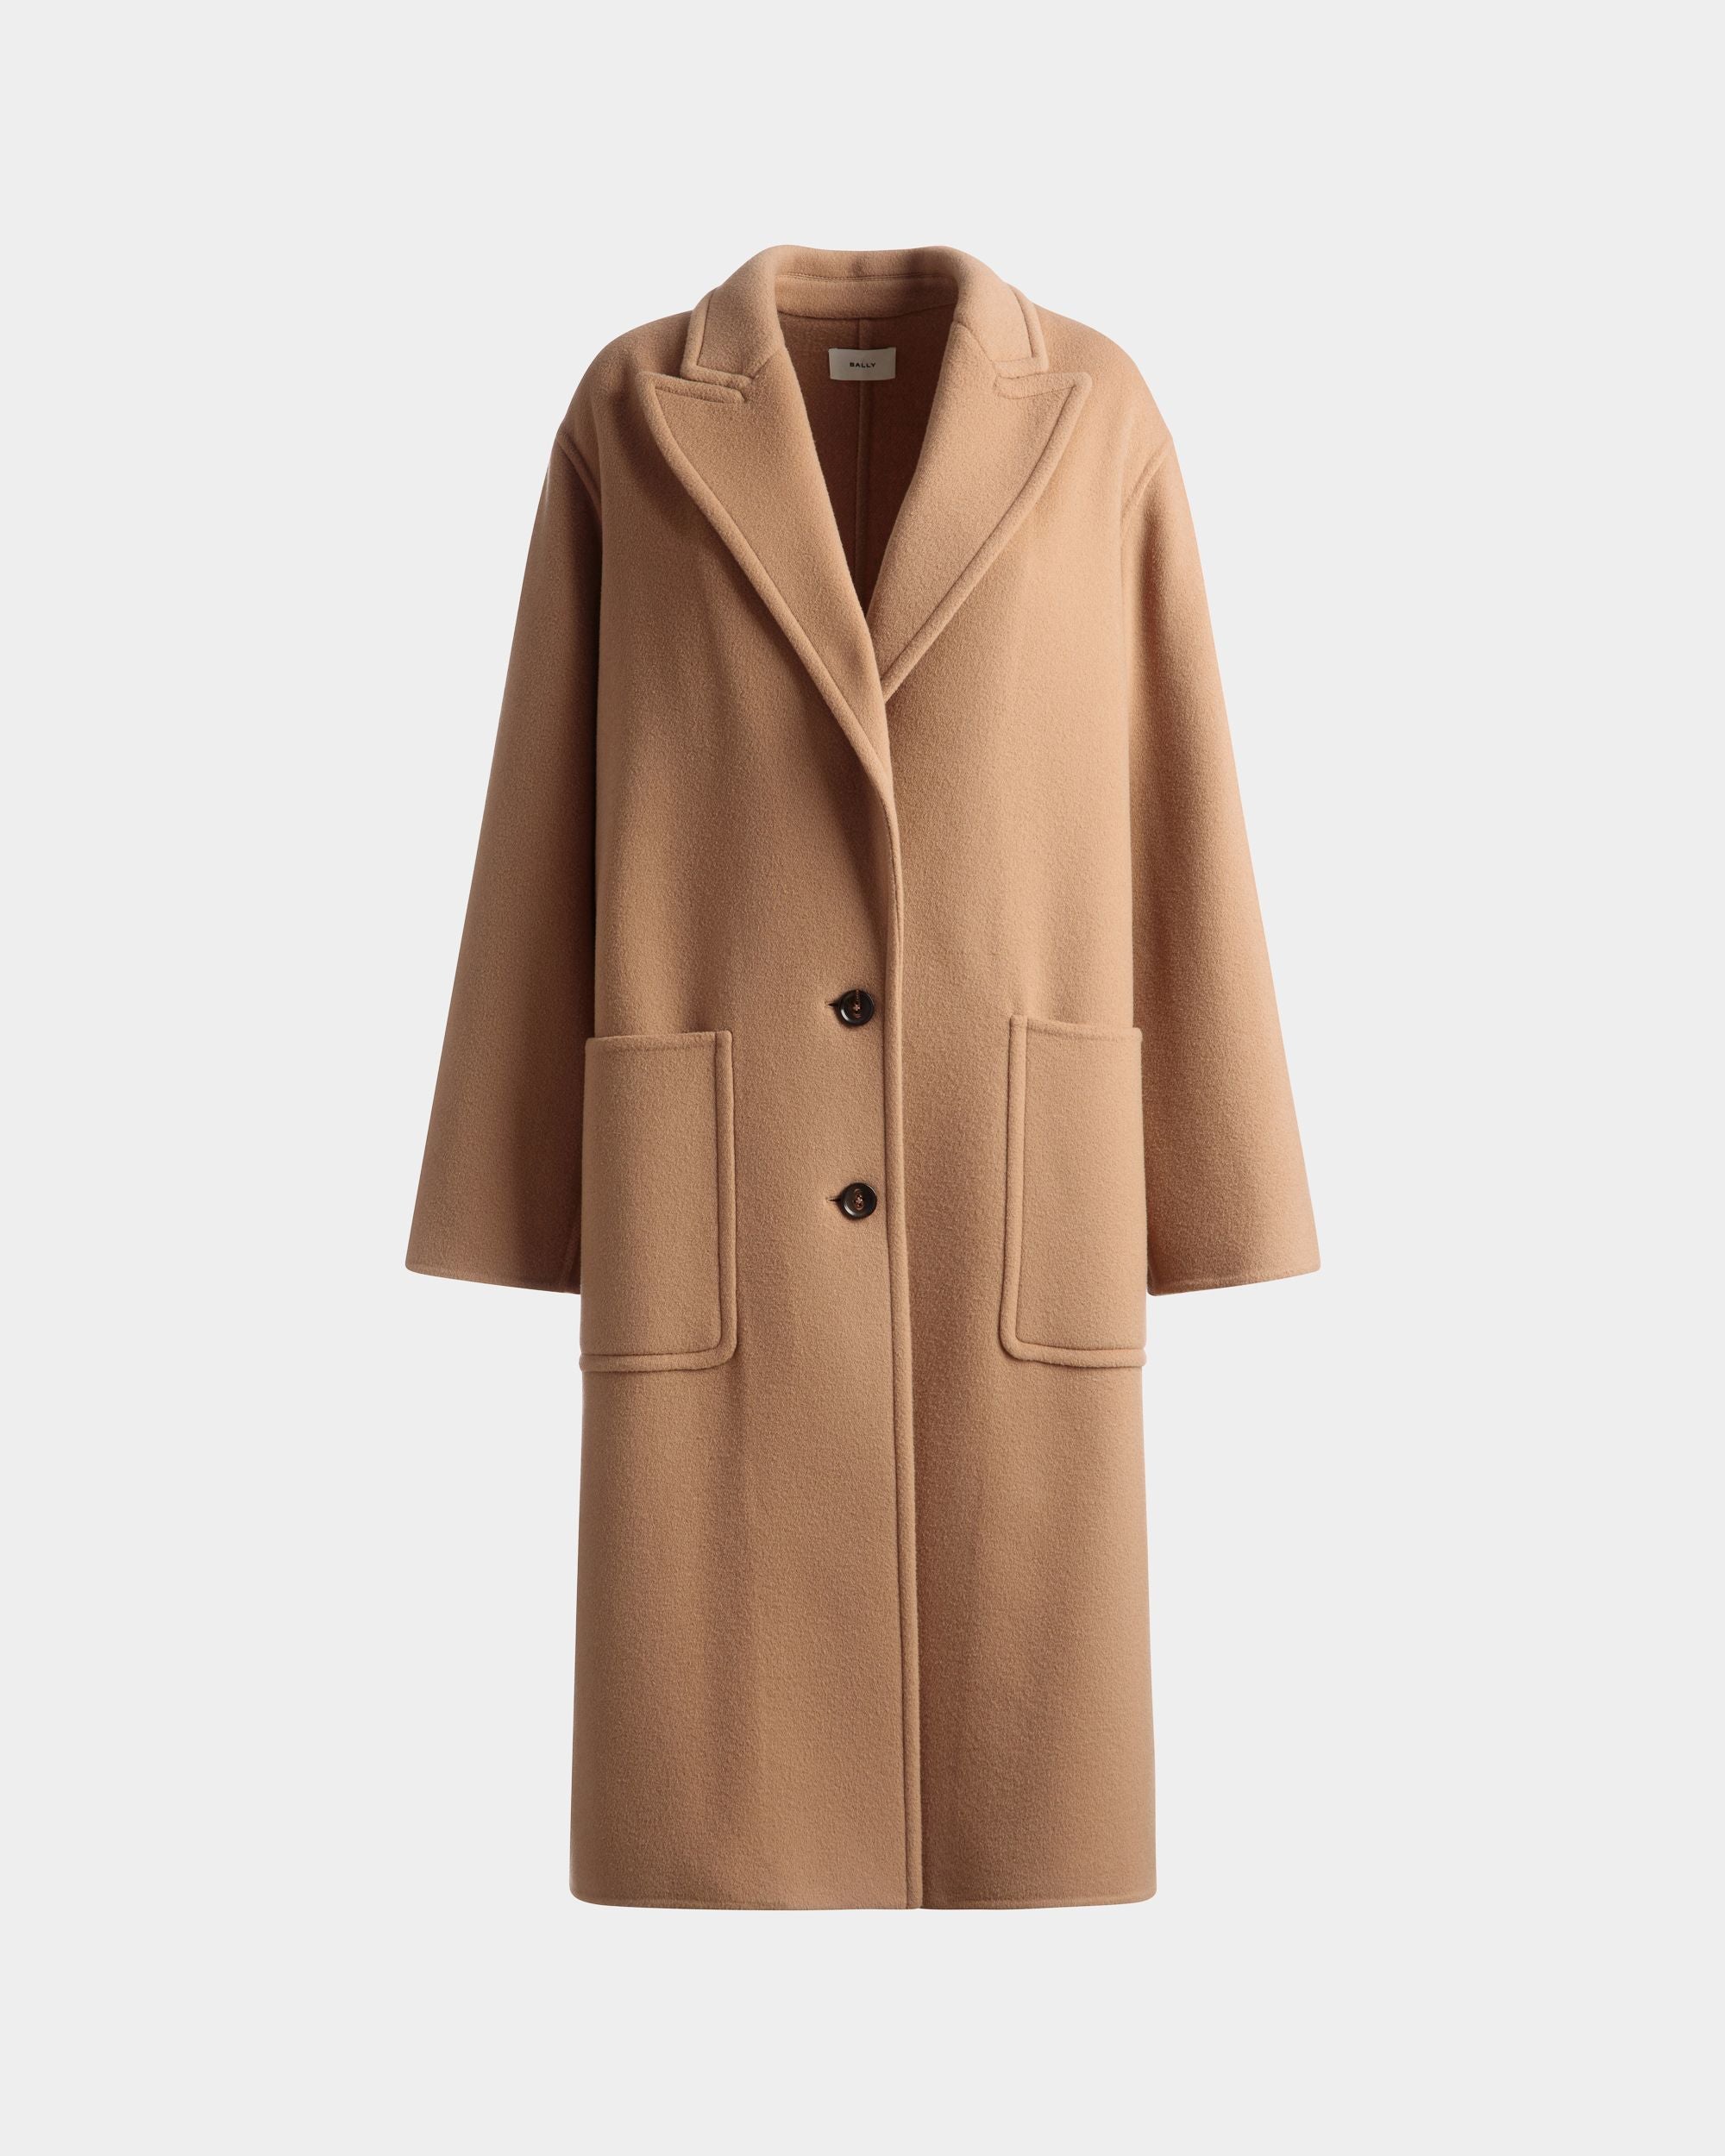 Single Breasted Coat | Women's Outerwear | Camel Cashmere Wool Mix | Bally | Still Life Front